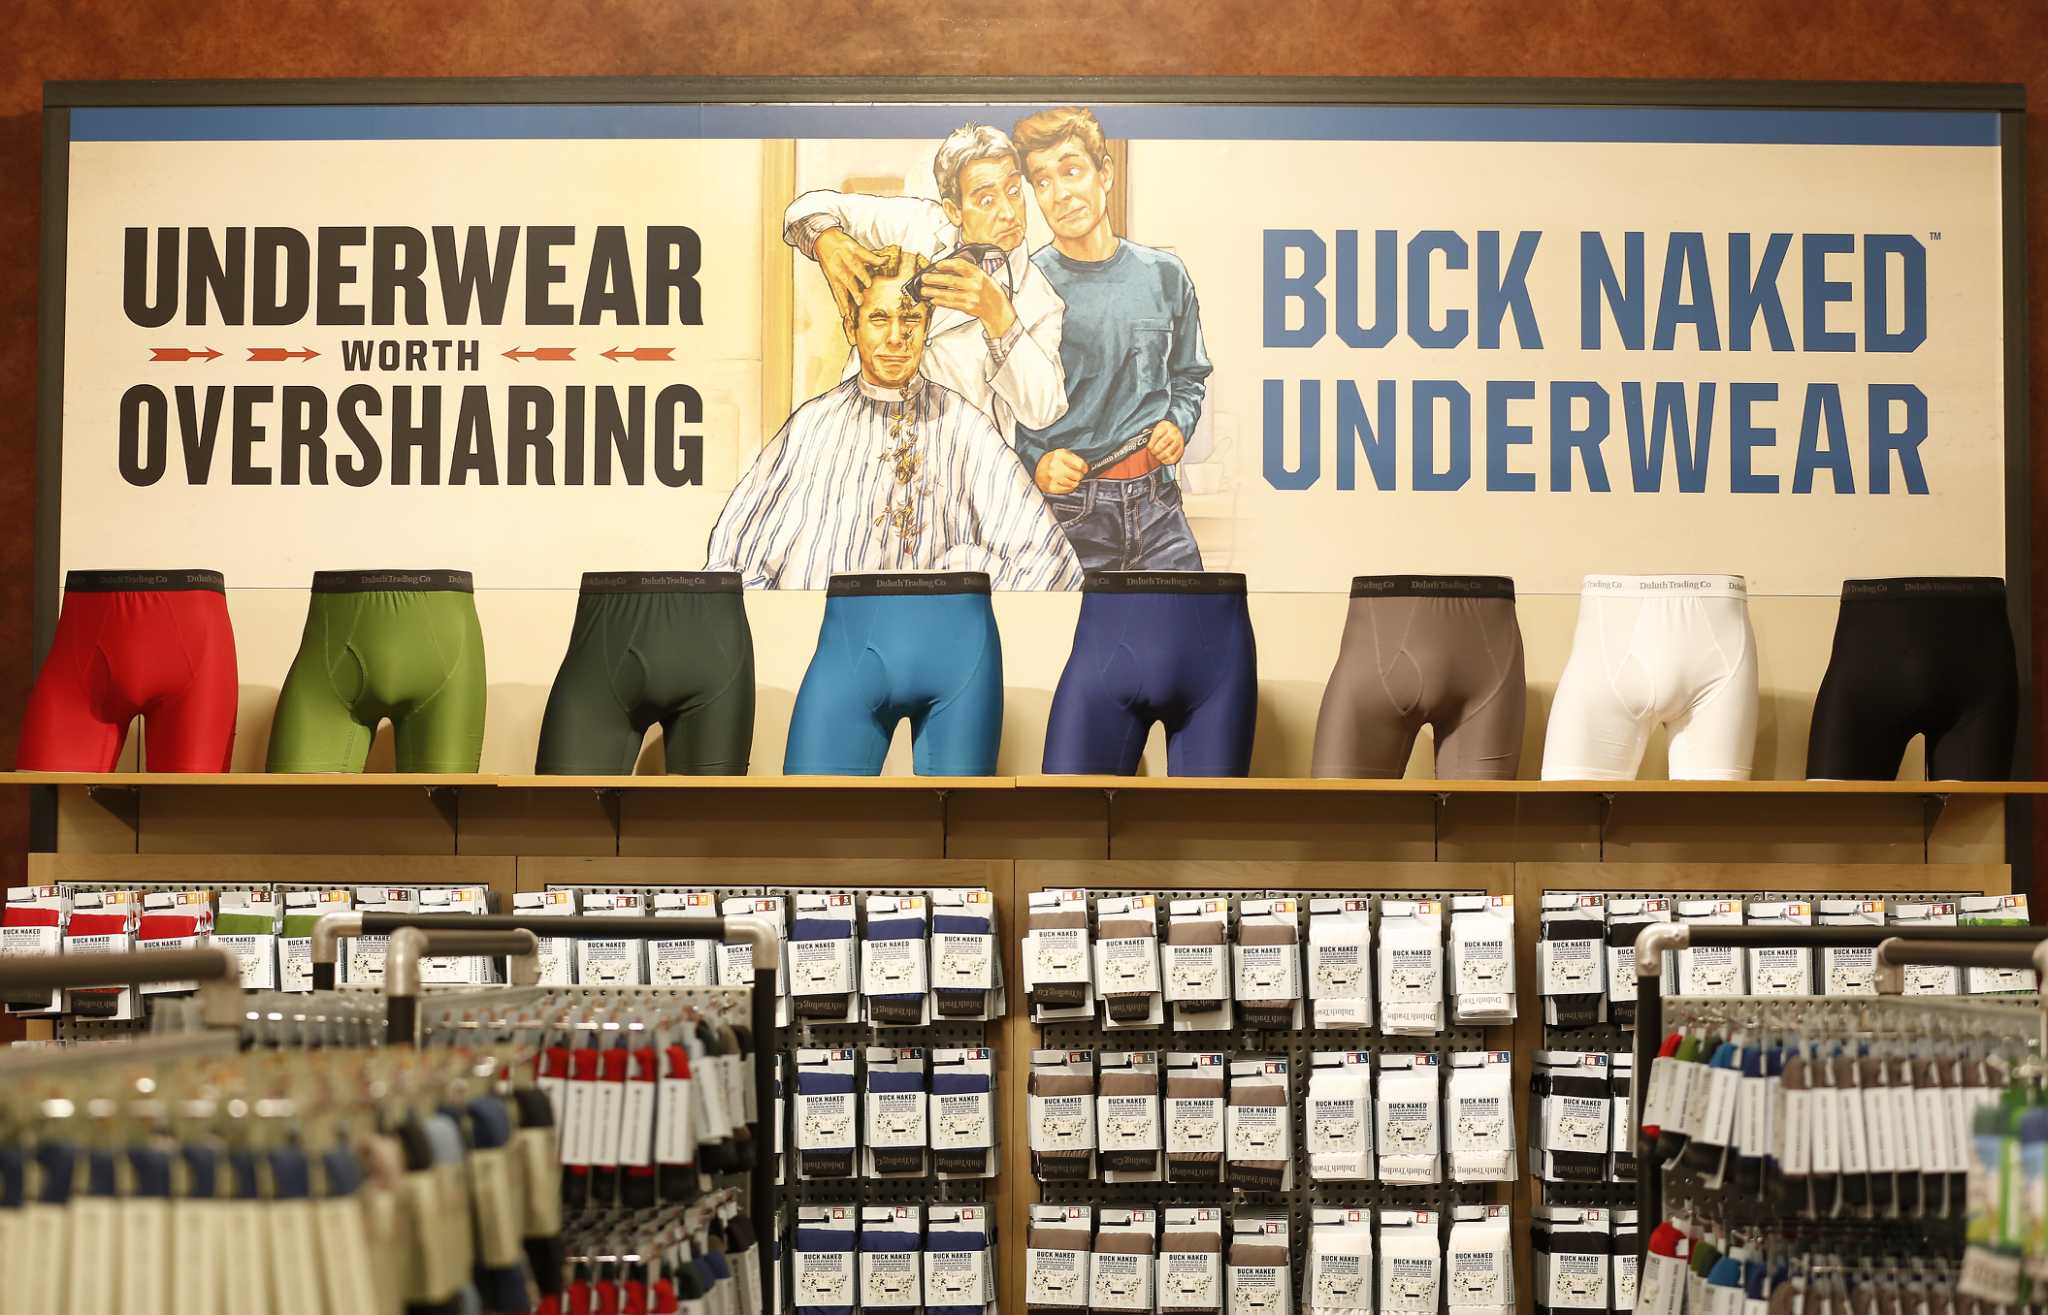 Duluth Trading Co. to host first-ever underwear 'trade-up' event